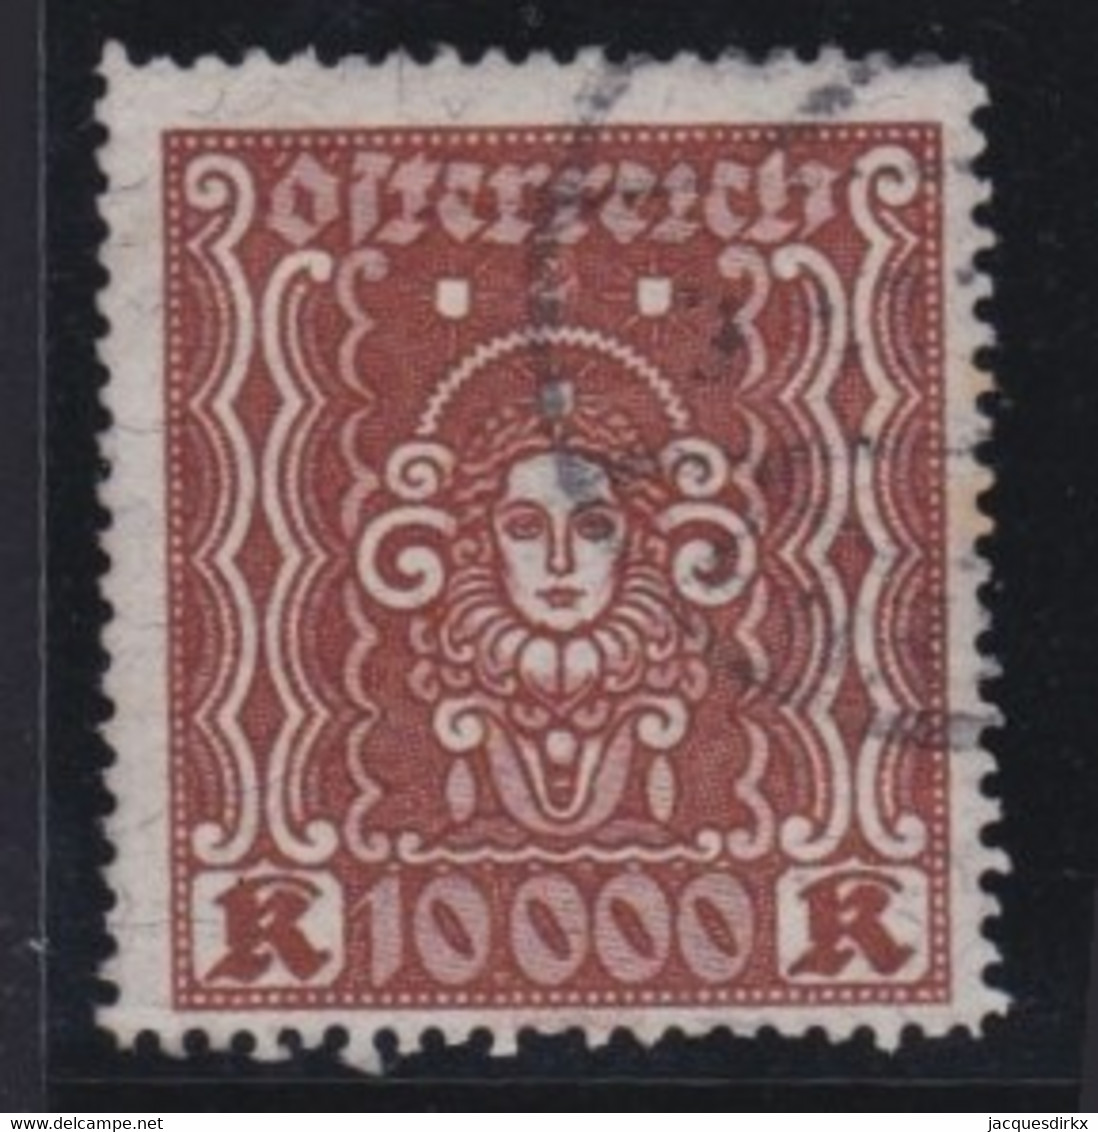 Österreich   .    Y&T    .    325      .    O     .     Gestempelt - Used Stamps